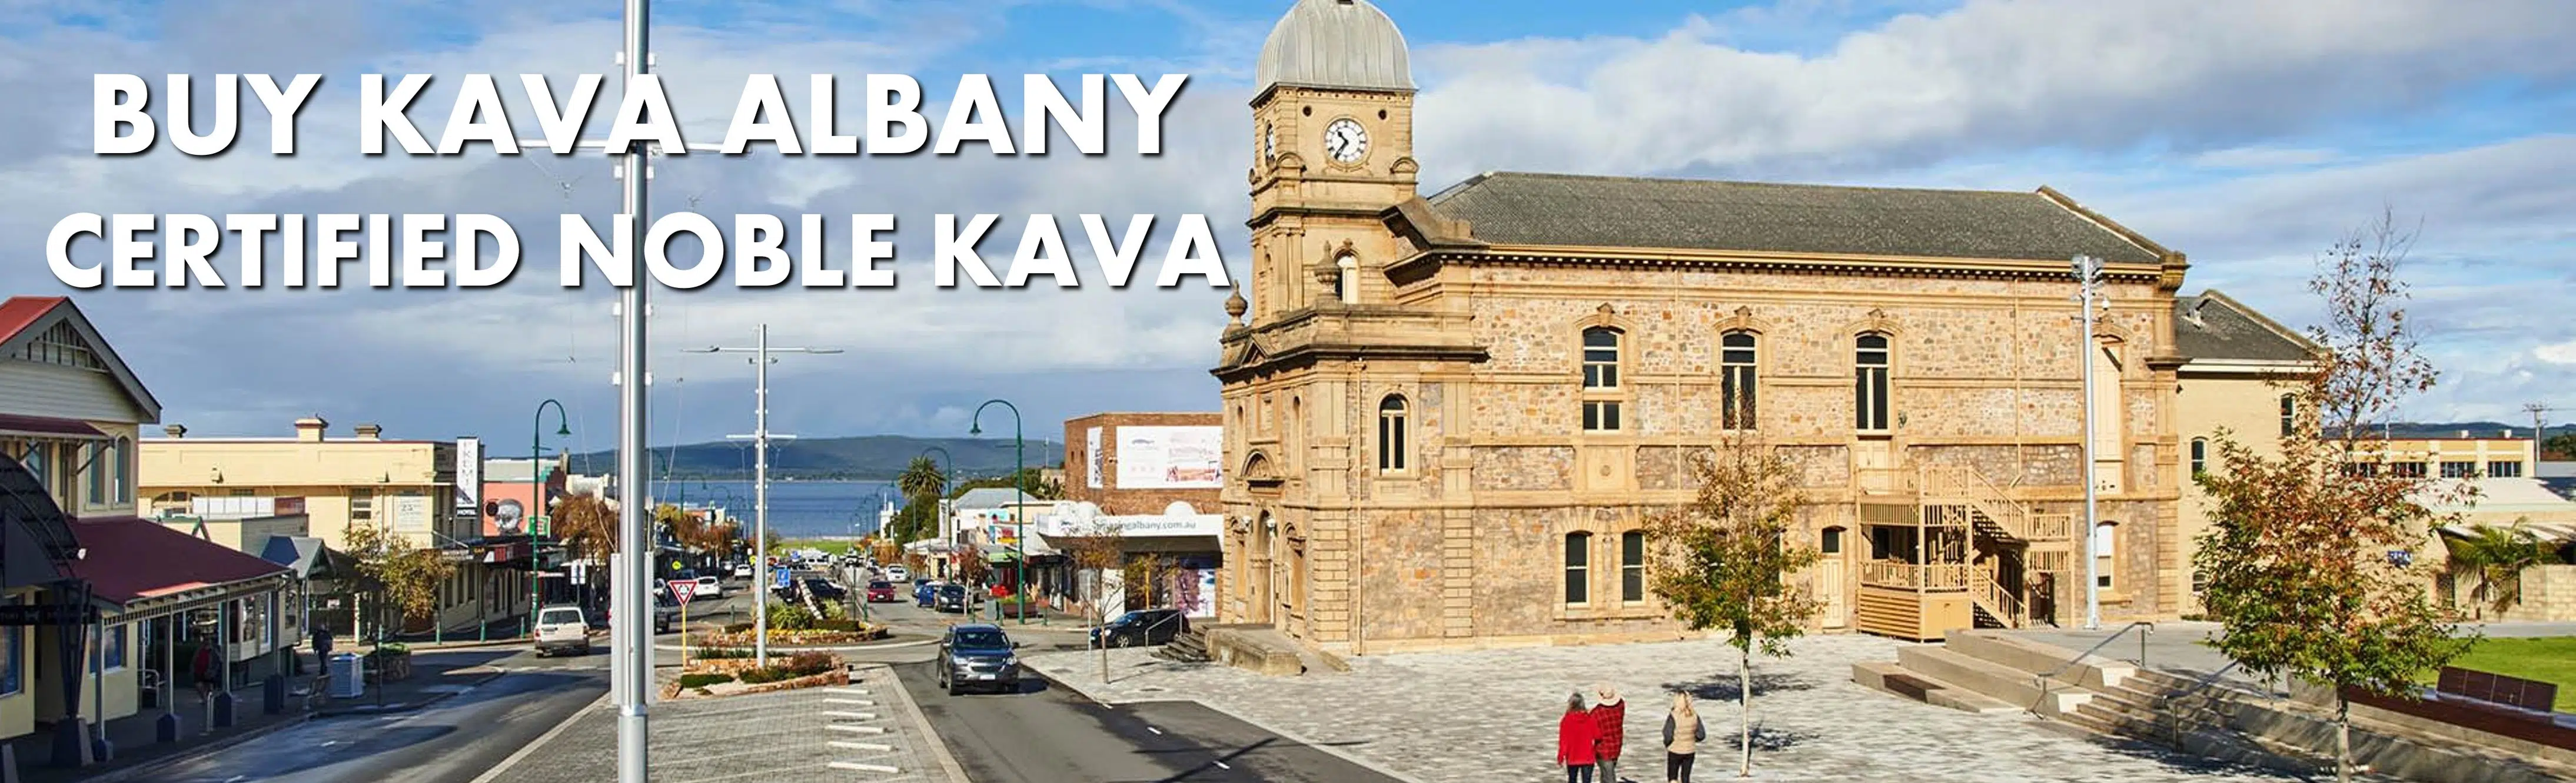 Town Hall in Albany Western Australia with caption Buy Kava Albany Certified Noble Kava